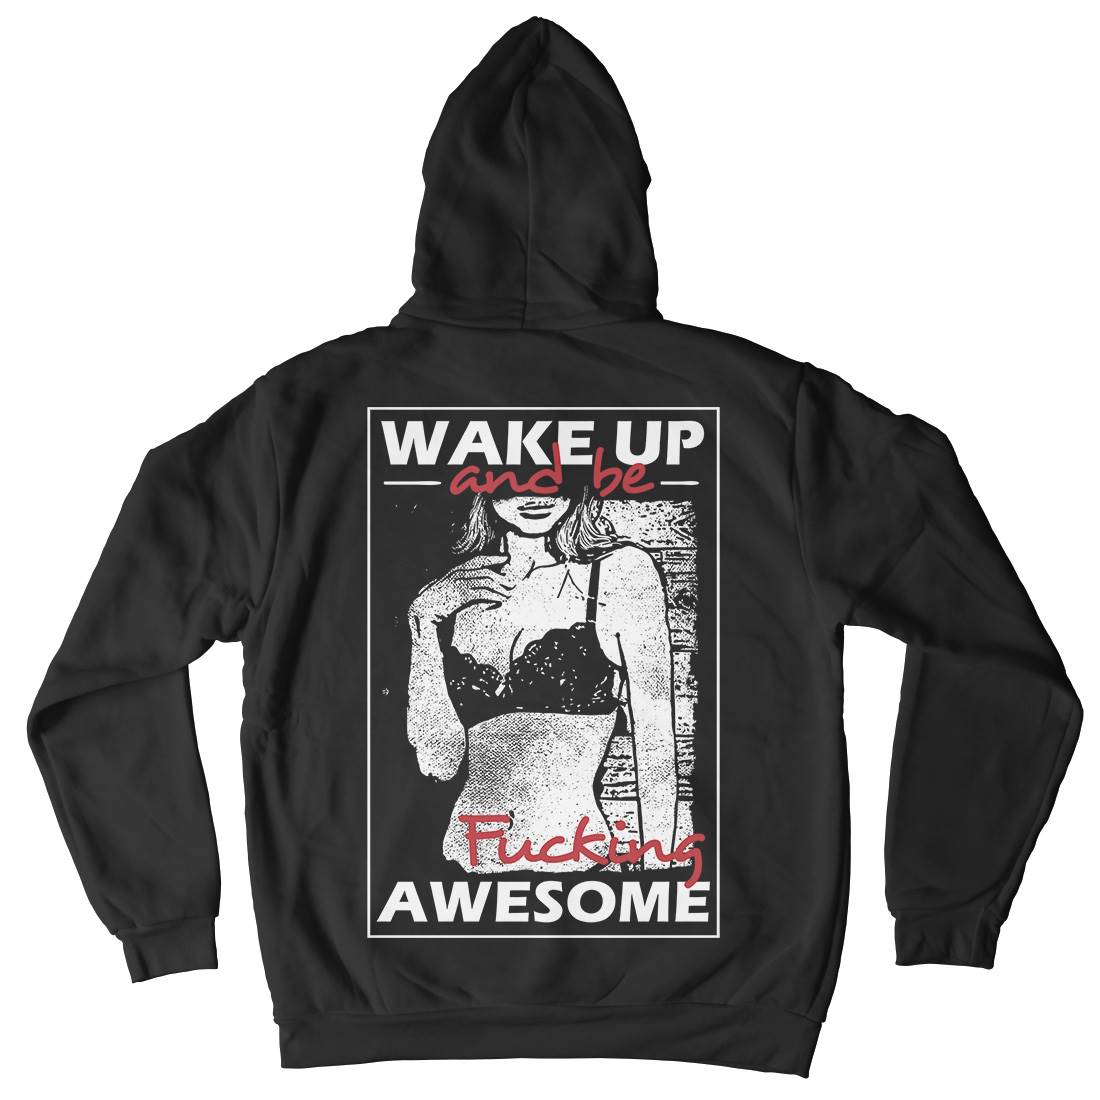 Wake Up And Be Awesome Kids Crew Neck Hoodie Gym C993